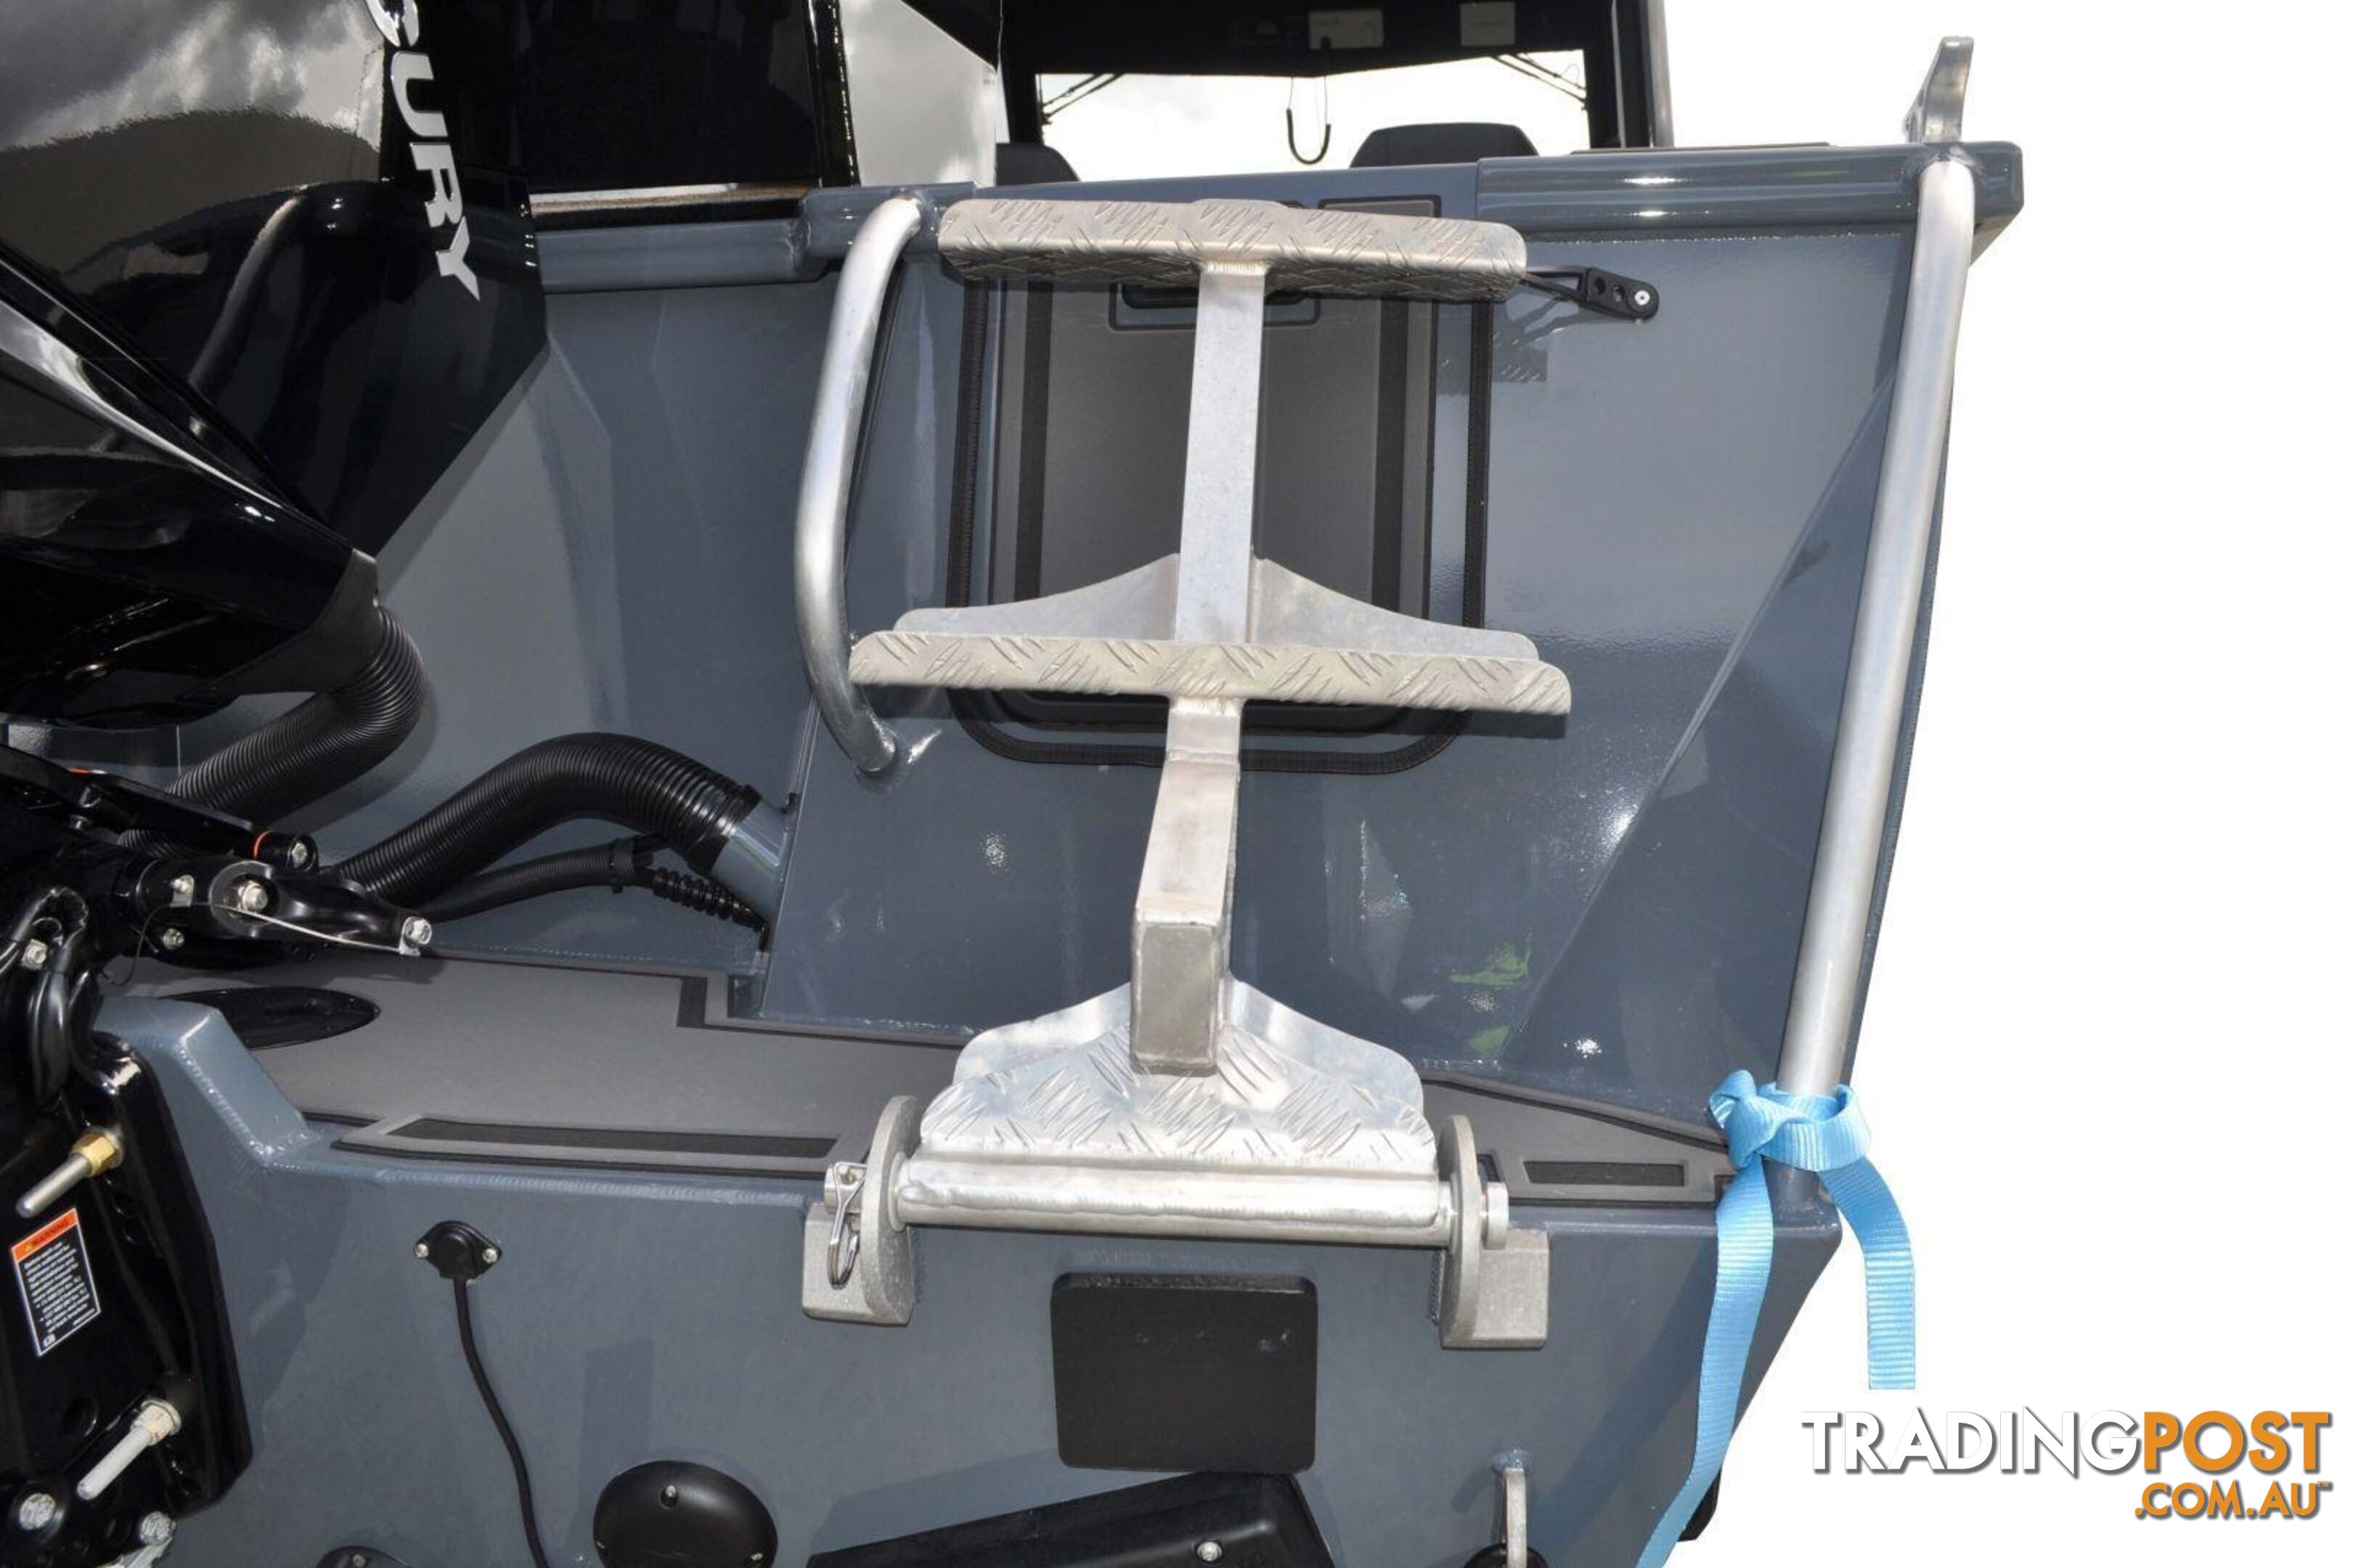 Yellowfin YF-76 Extended Cabin + Yamaha F300hp 4-Stroke - Pack 3 for sale online prices